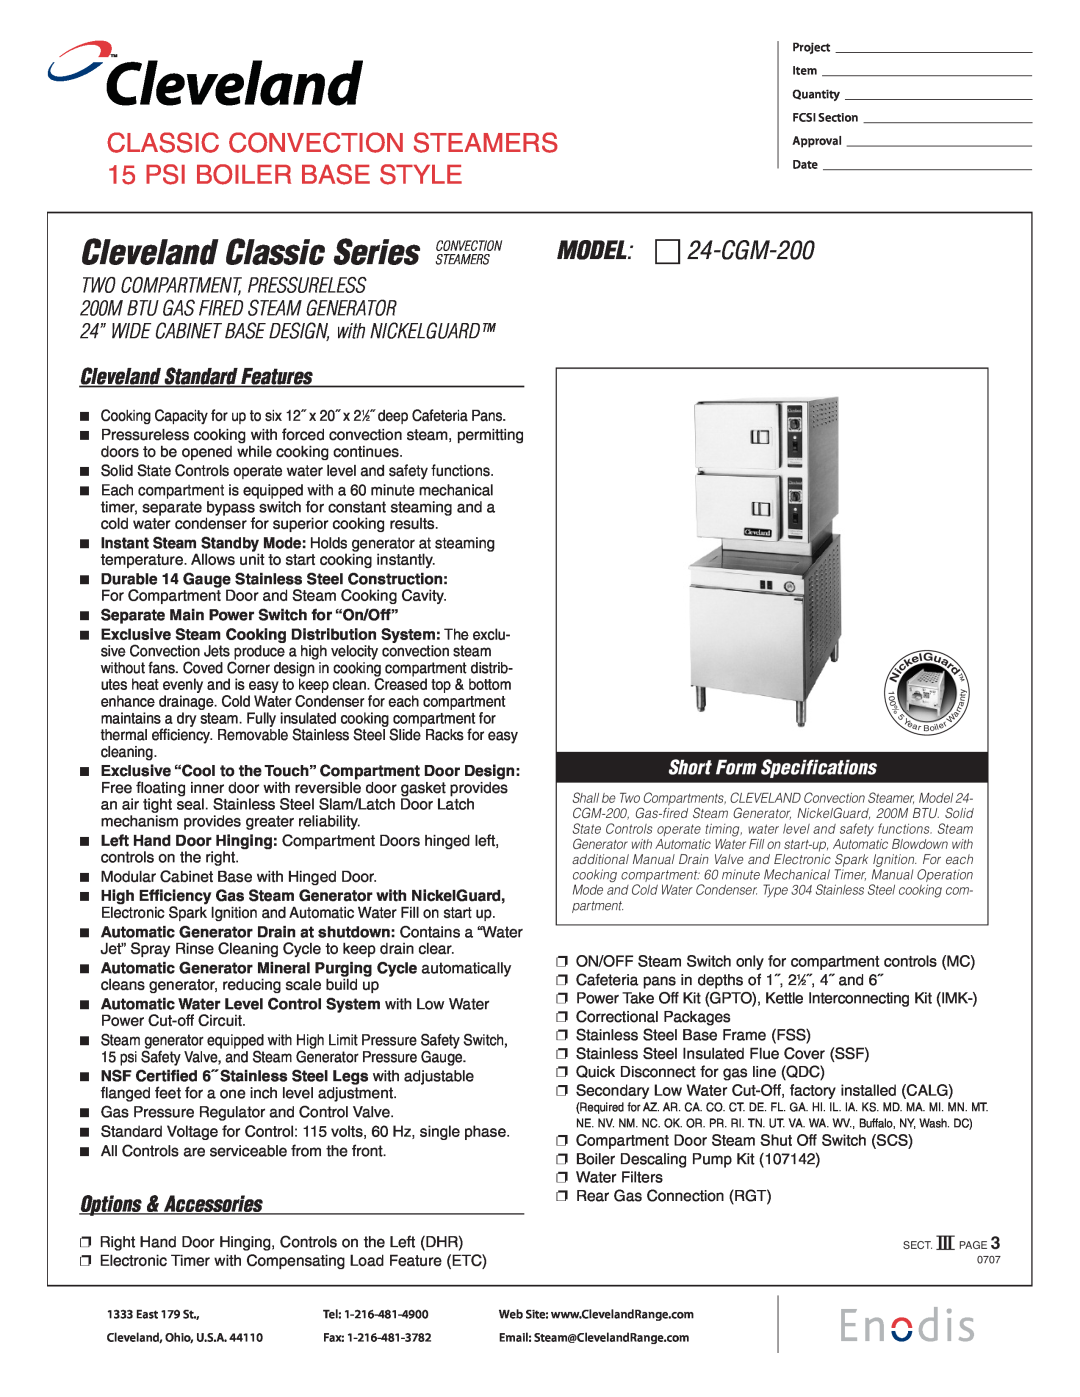 Cleveland Range specifications Cleveland Classic Series CONVECTION, MODEL χ 24-CGM-200, Cleveland Standard Features 